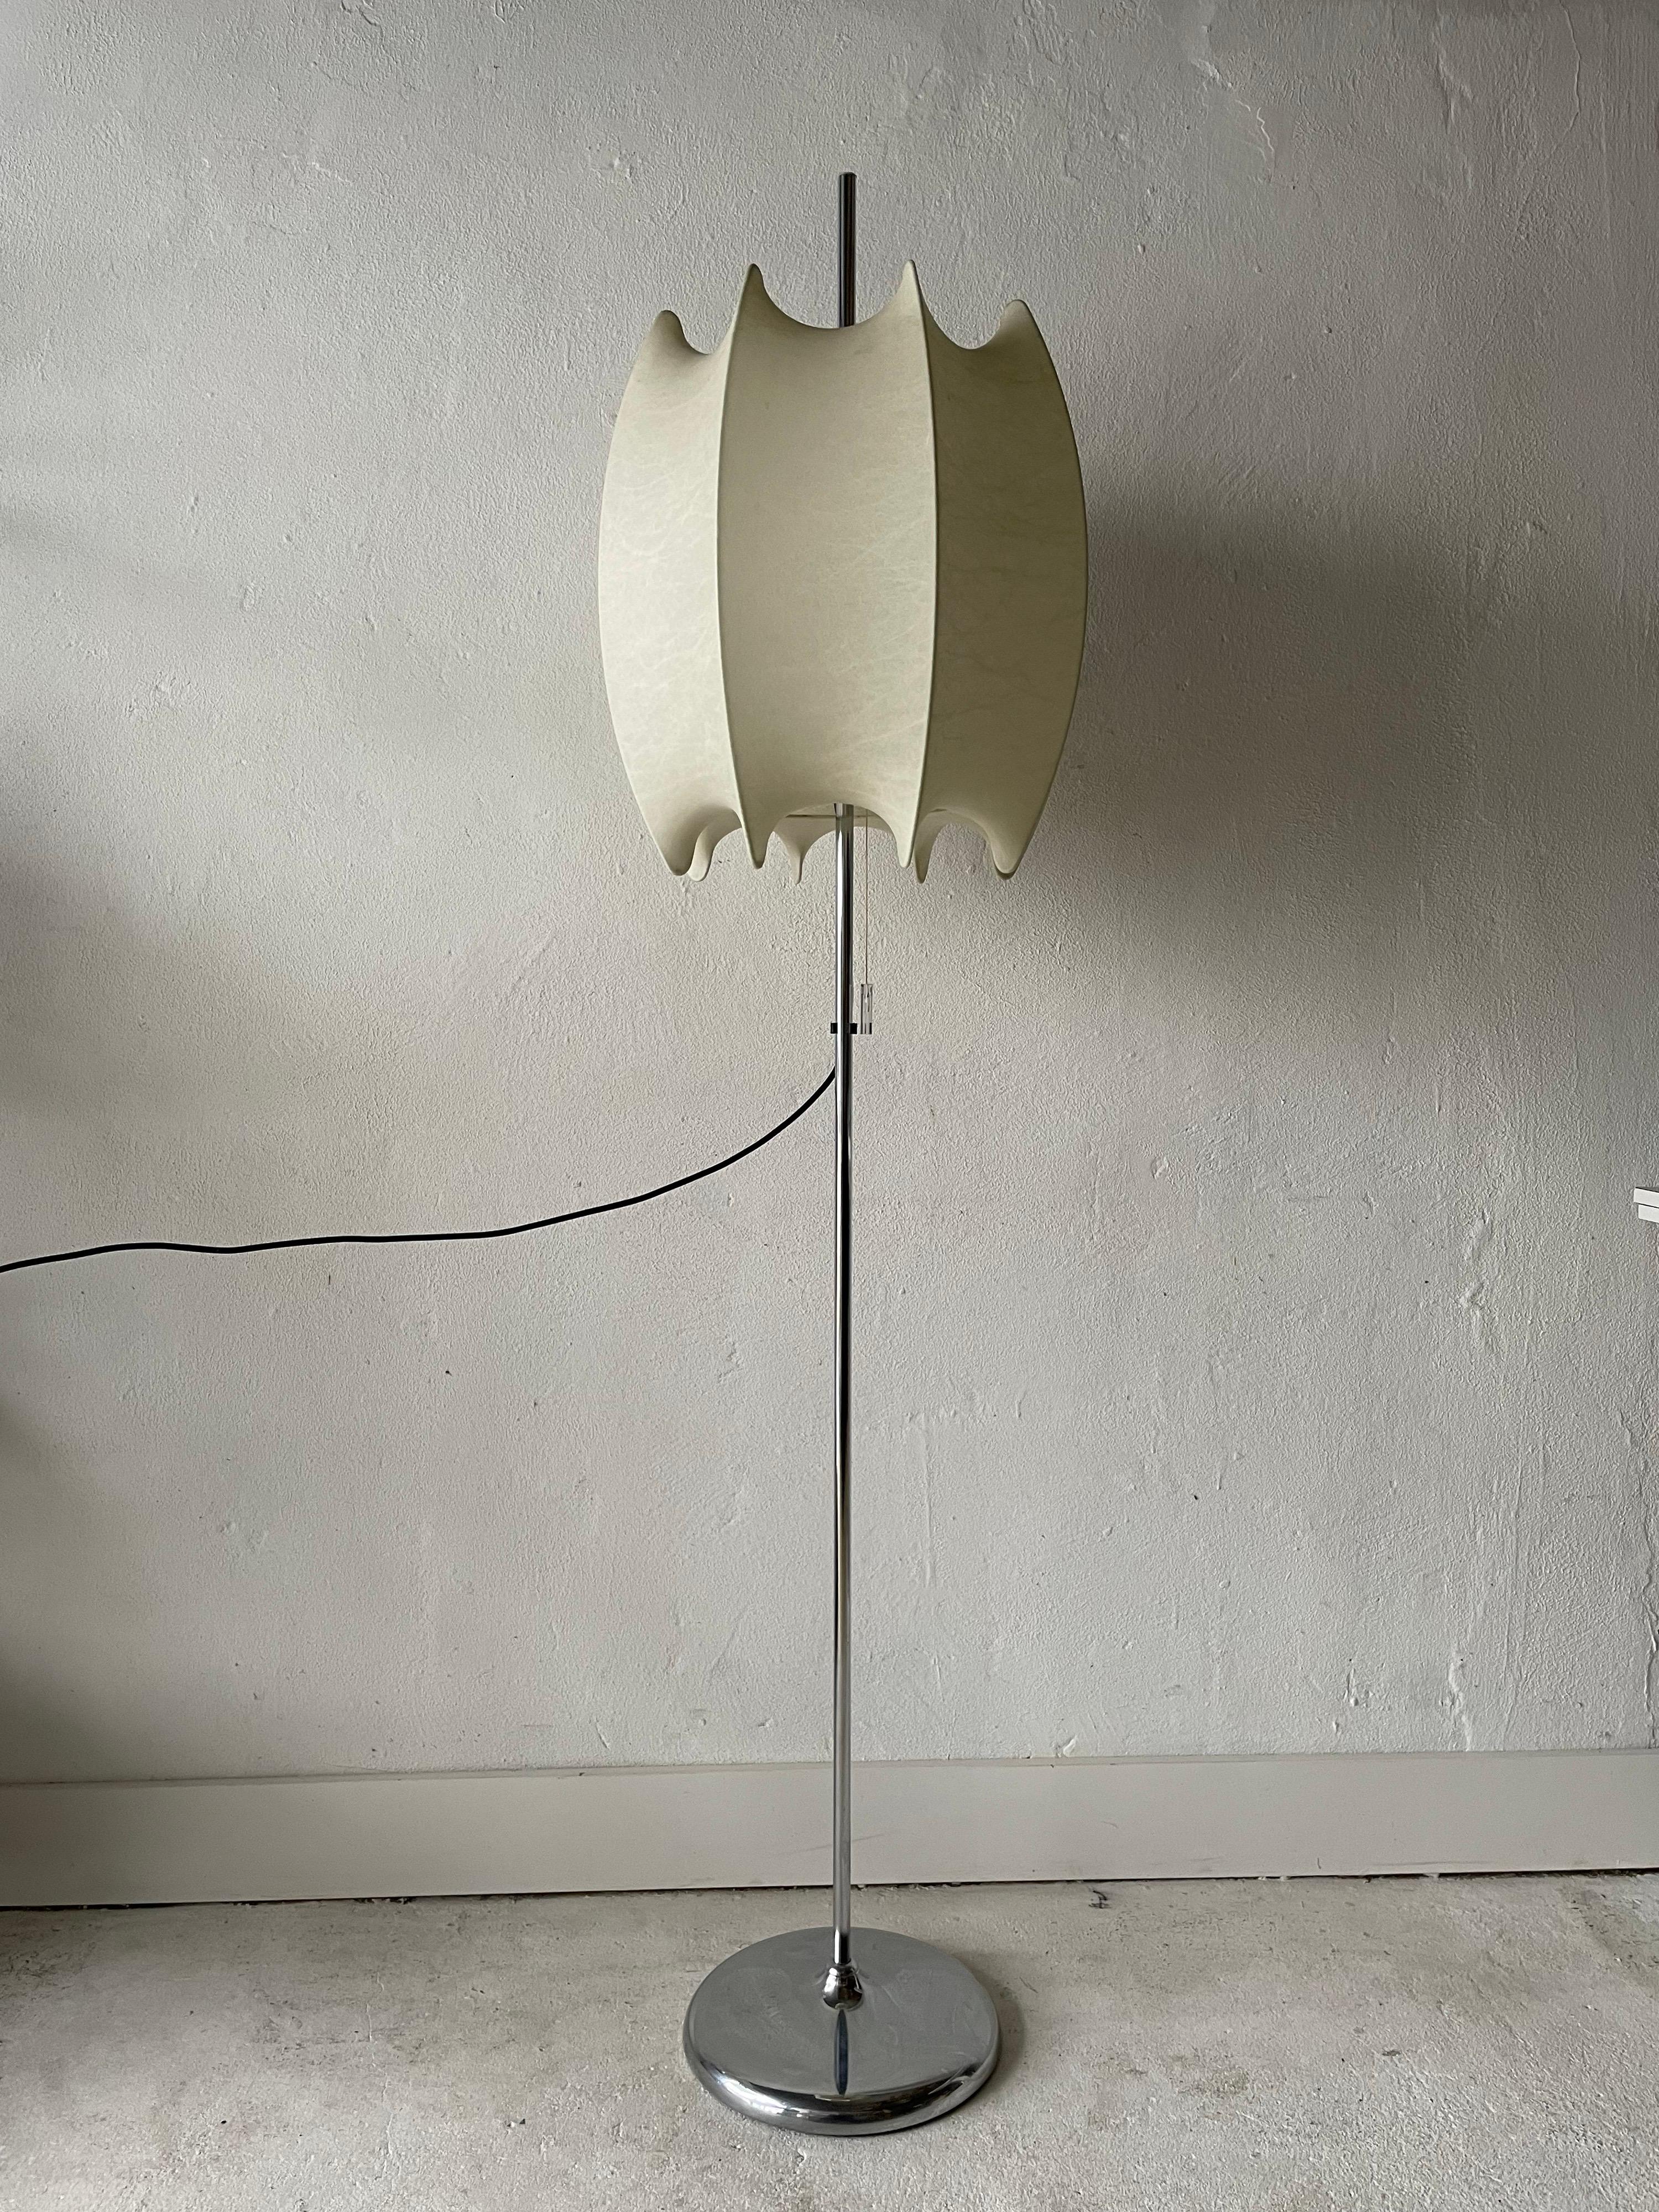 Rare cocoon floor lamp by Goldkant, 1960s Grmany

Lamp is in very good vintage condition.

This lamp works with 2xE27 light bulb. Max 100W
Wired and suitable to use with 220V and 110V for all countries.

Measurements:
Height: 165 cm
Shade